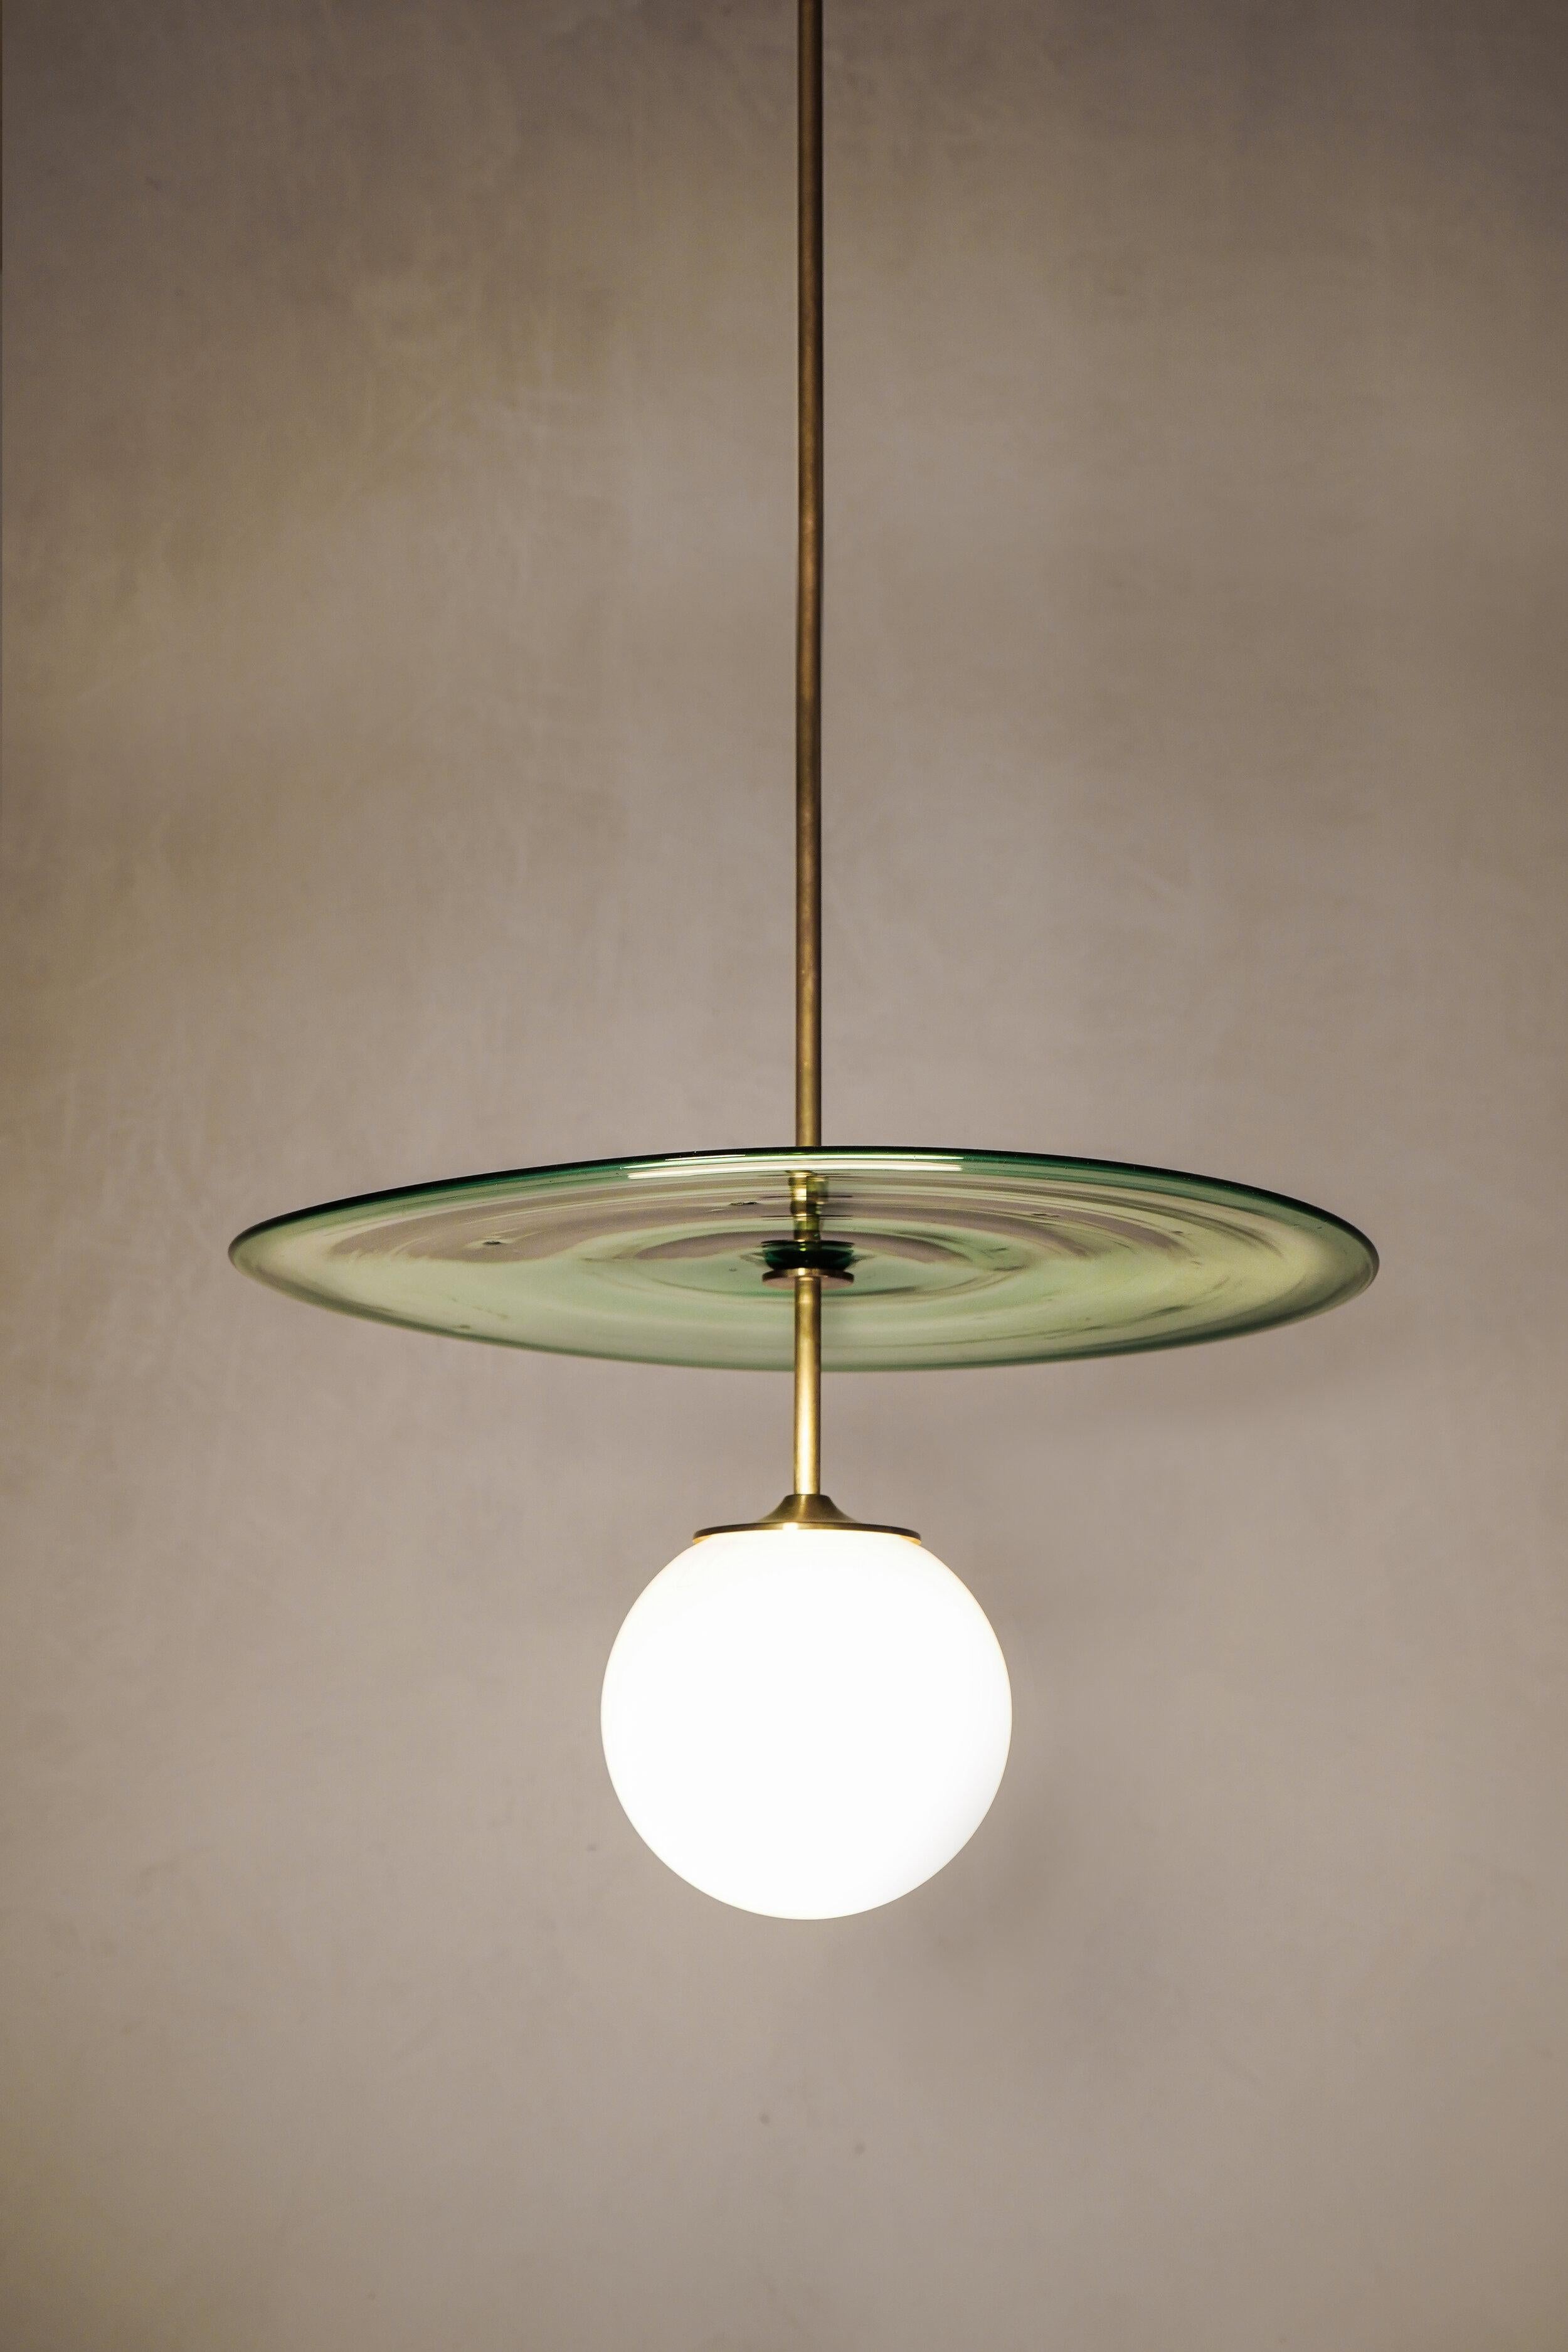 Plat pendant 40/42 by Contain
Dimensions: D 42 x H 100 cm (custom length).
Materials: Brass structure, opal glass and blown glass from local production.
Available in different finishes. Available in two diferents diameters: 40/42 cm Ø x (custom